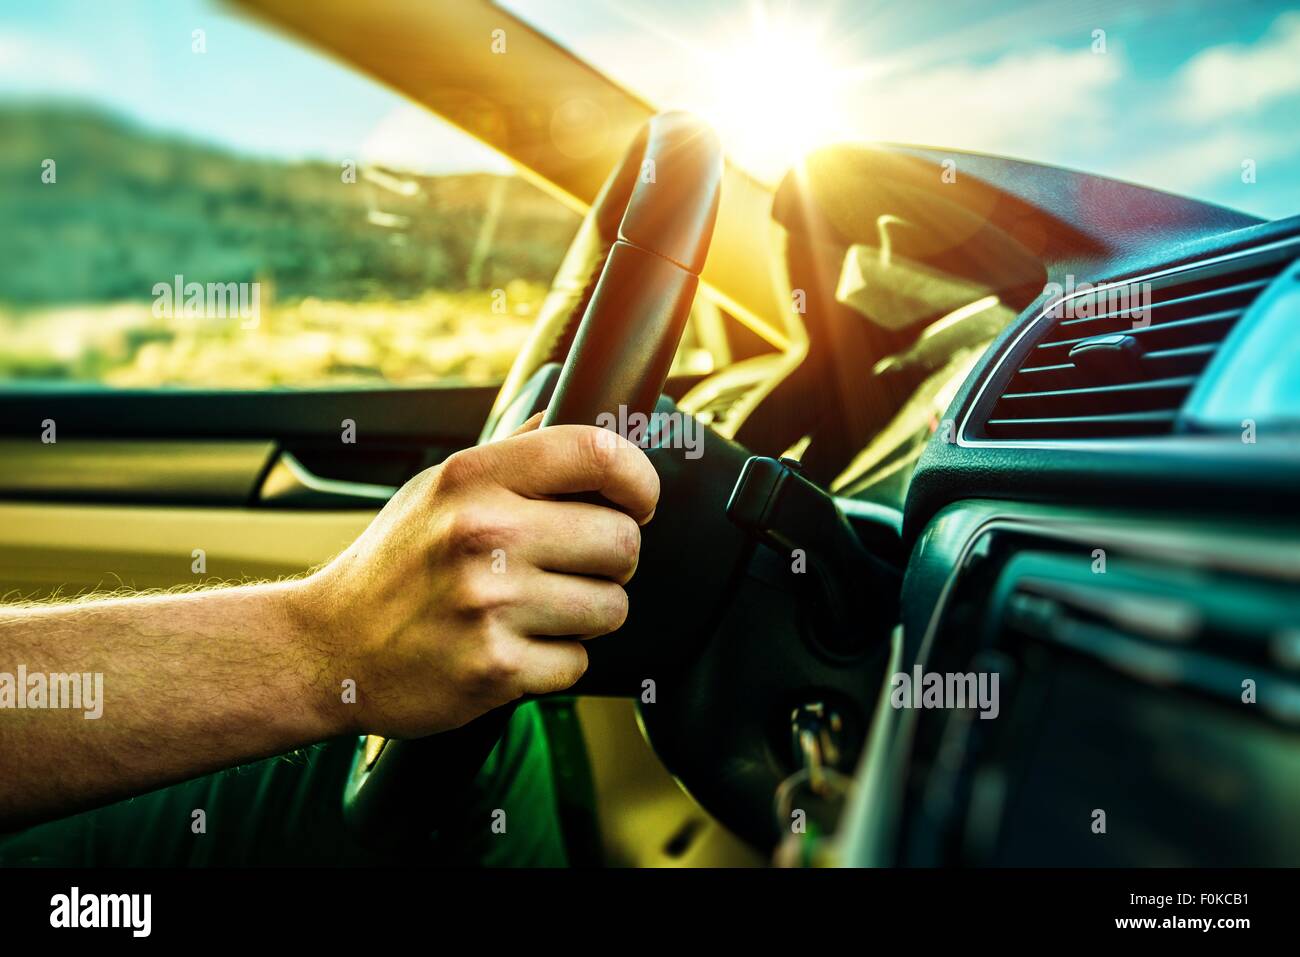 Summer Time Car Trip. Car Traveling. Men Driving Down the Road During Scenic Sunset. Stock Photo